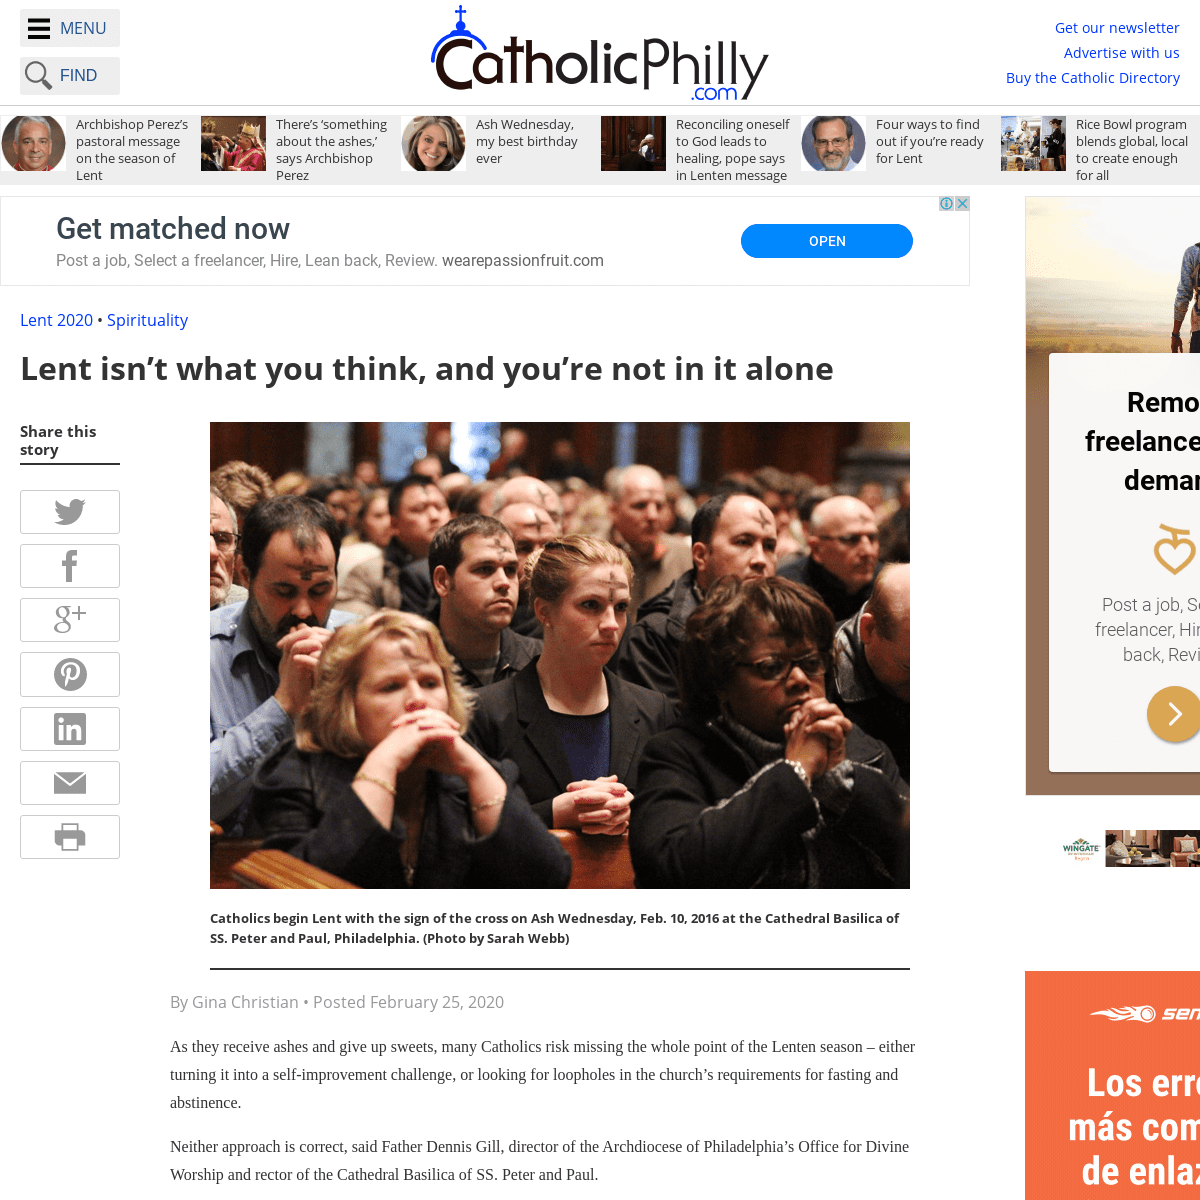 A complete backup of catholicphilly.com/2020/02/catholic-spirituality/lent-isnt-what-you-think-and-youre-not-in-it-alone/